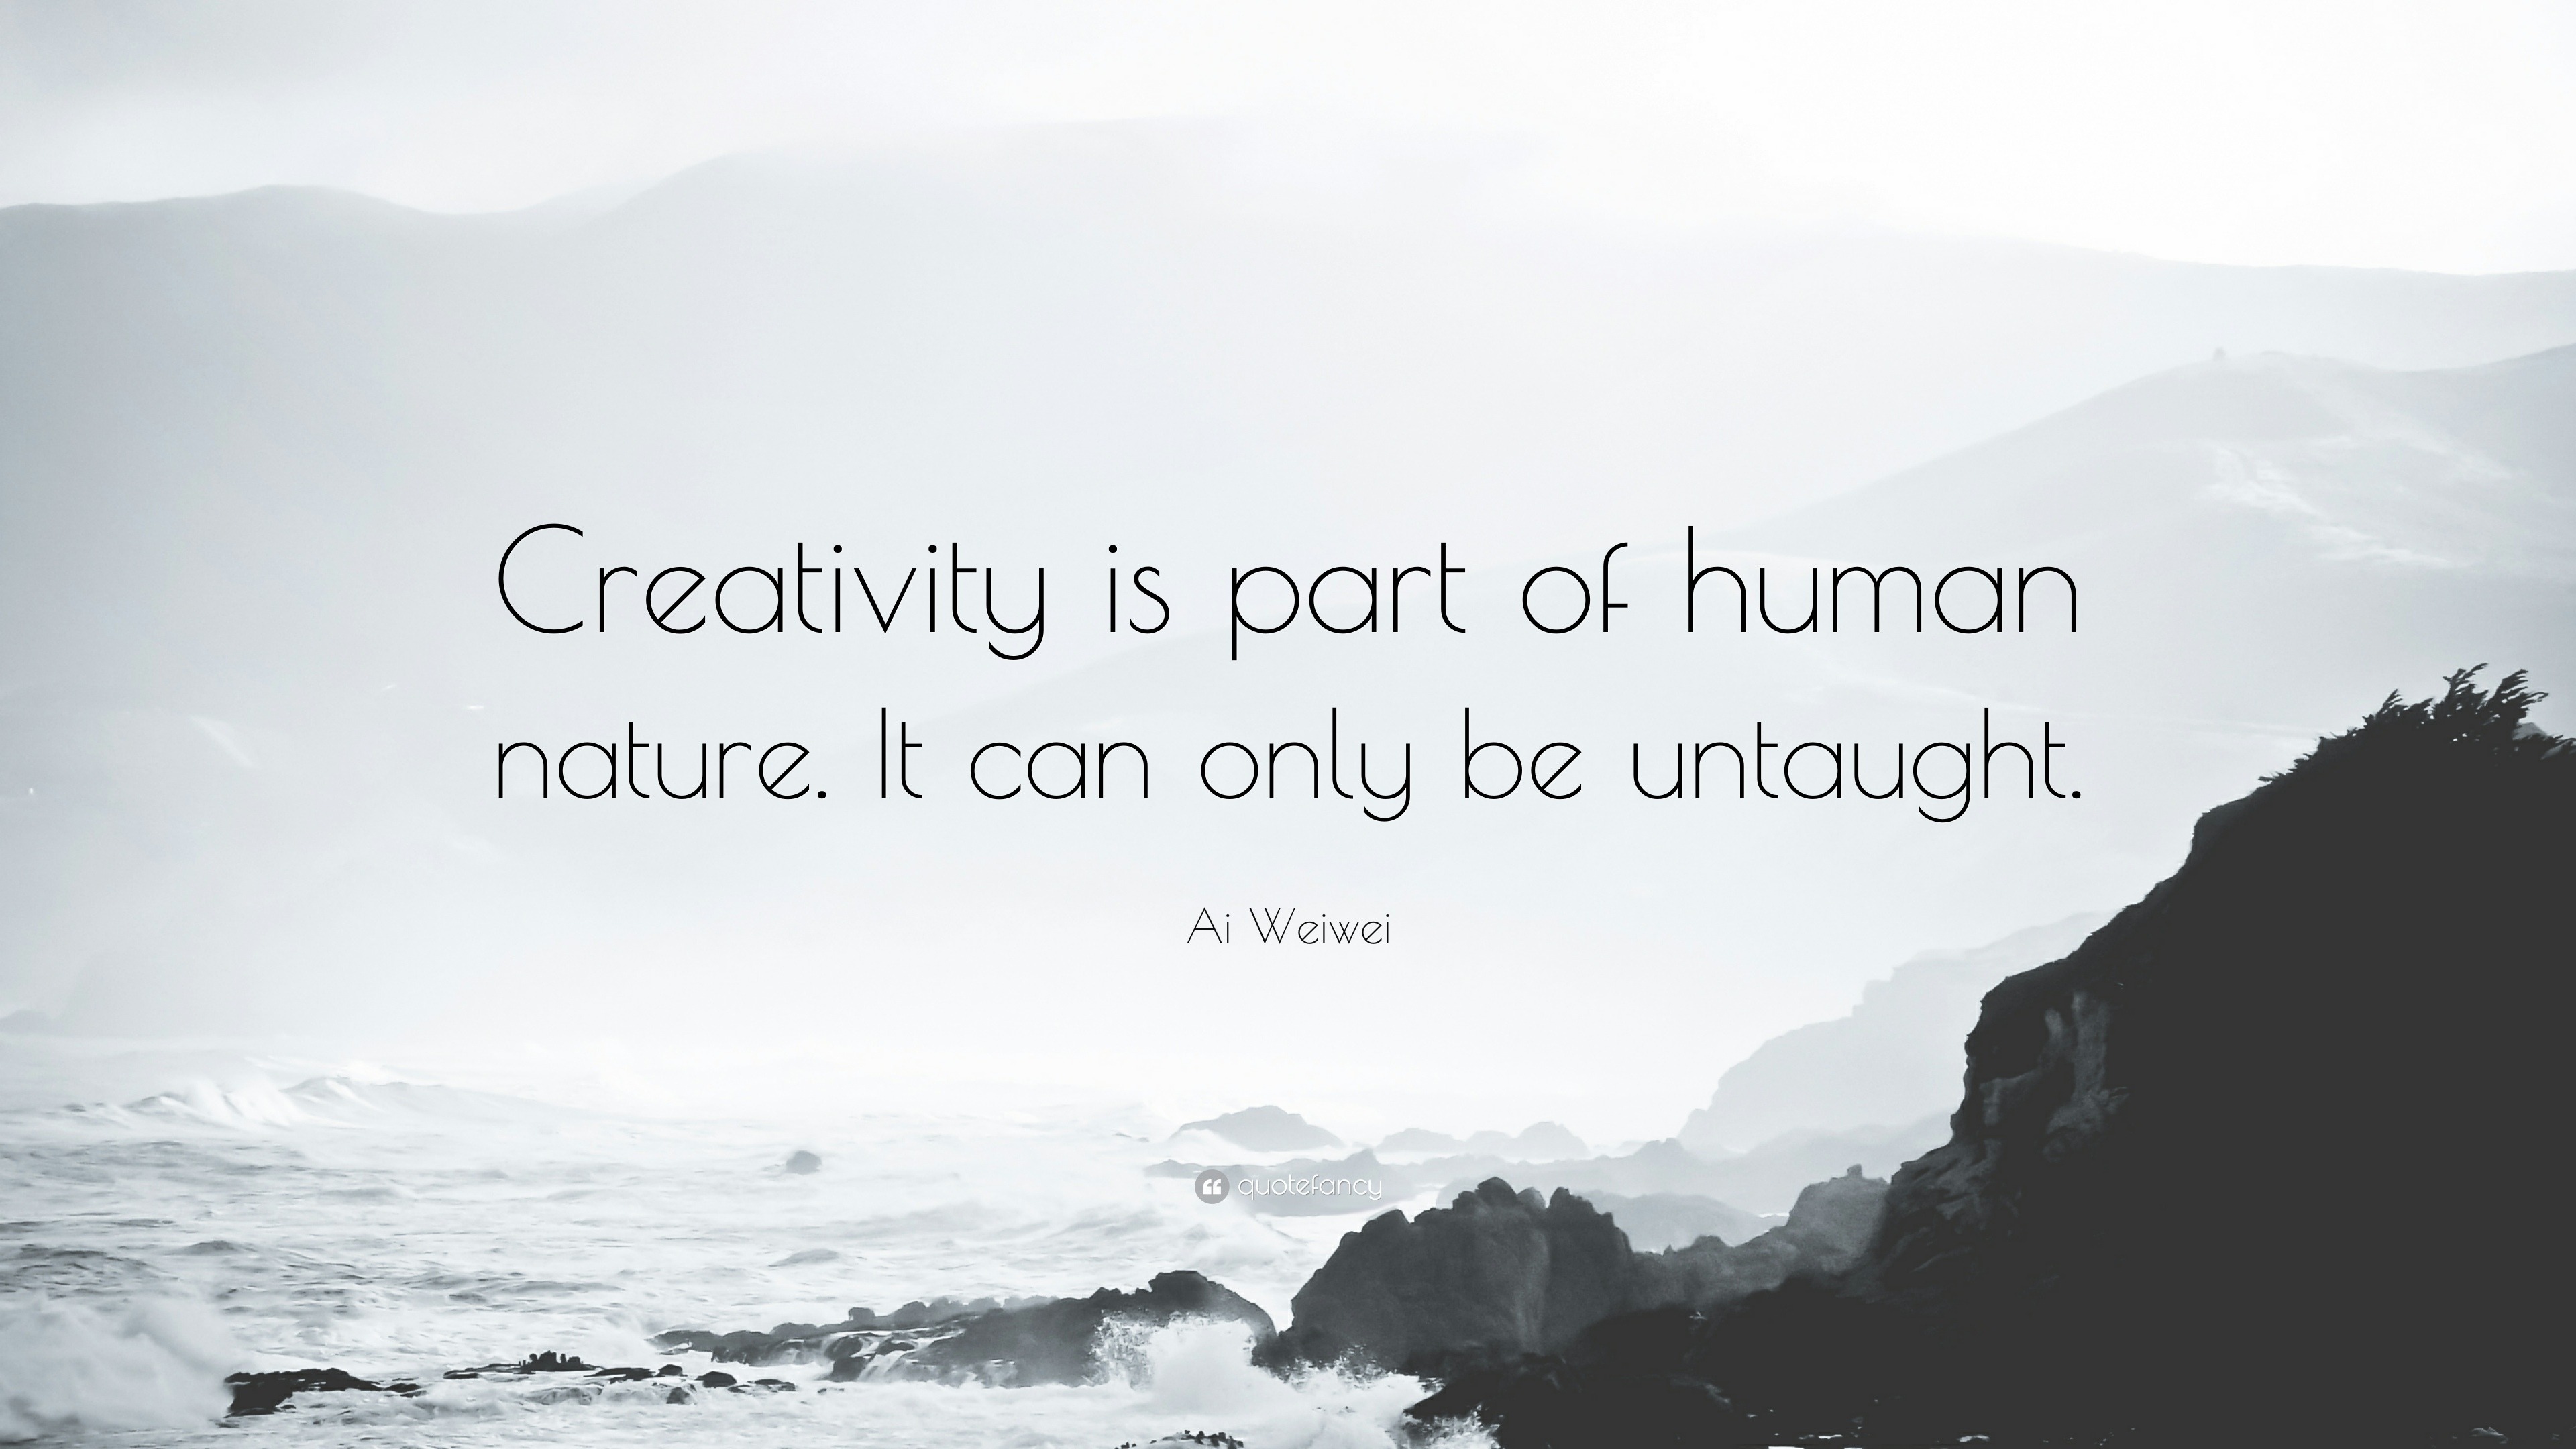 Ai Quote: “Creativity is part of human nature. It can only